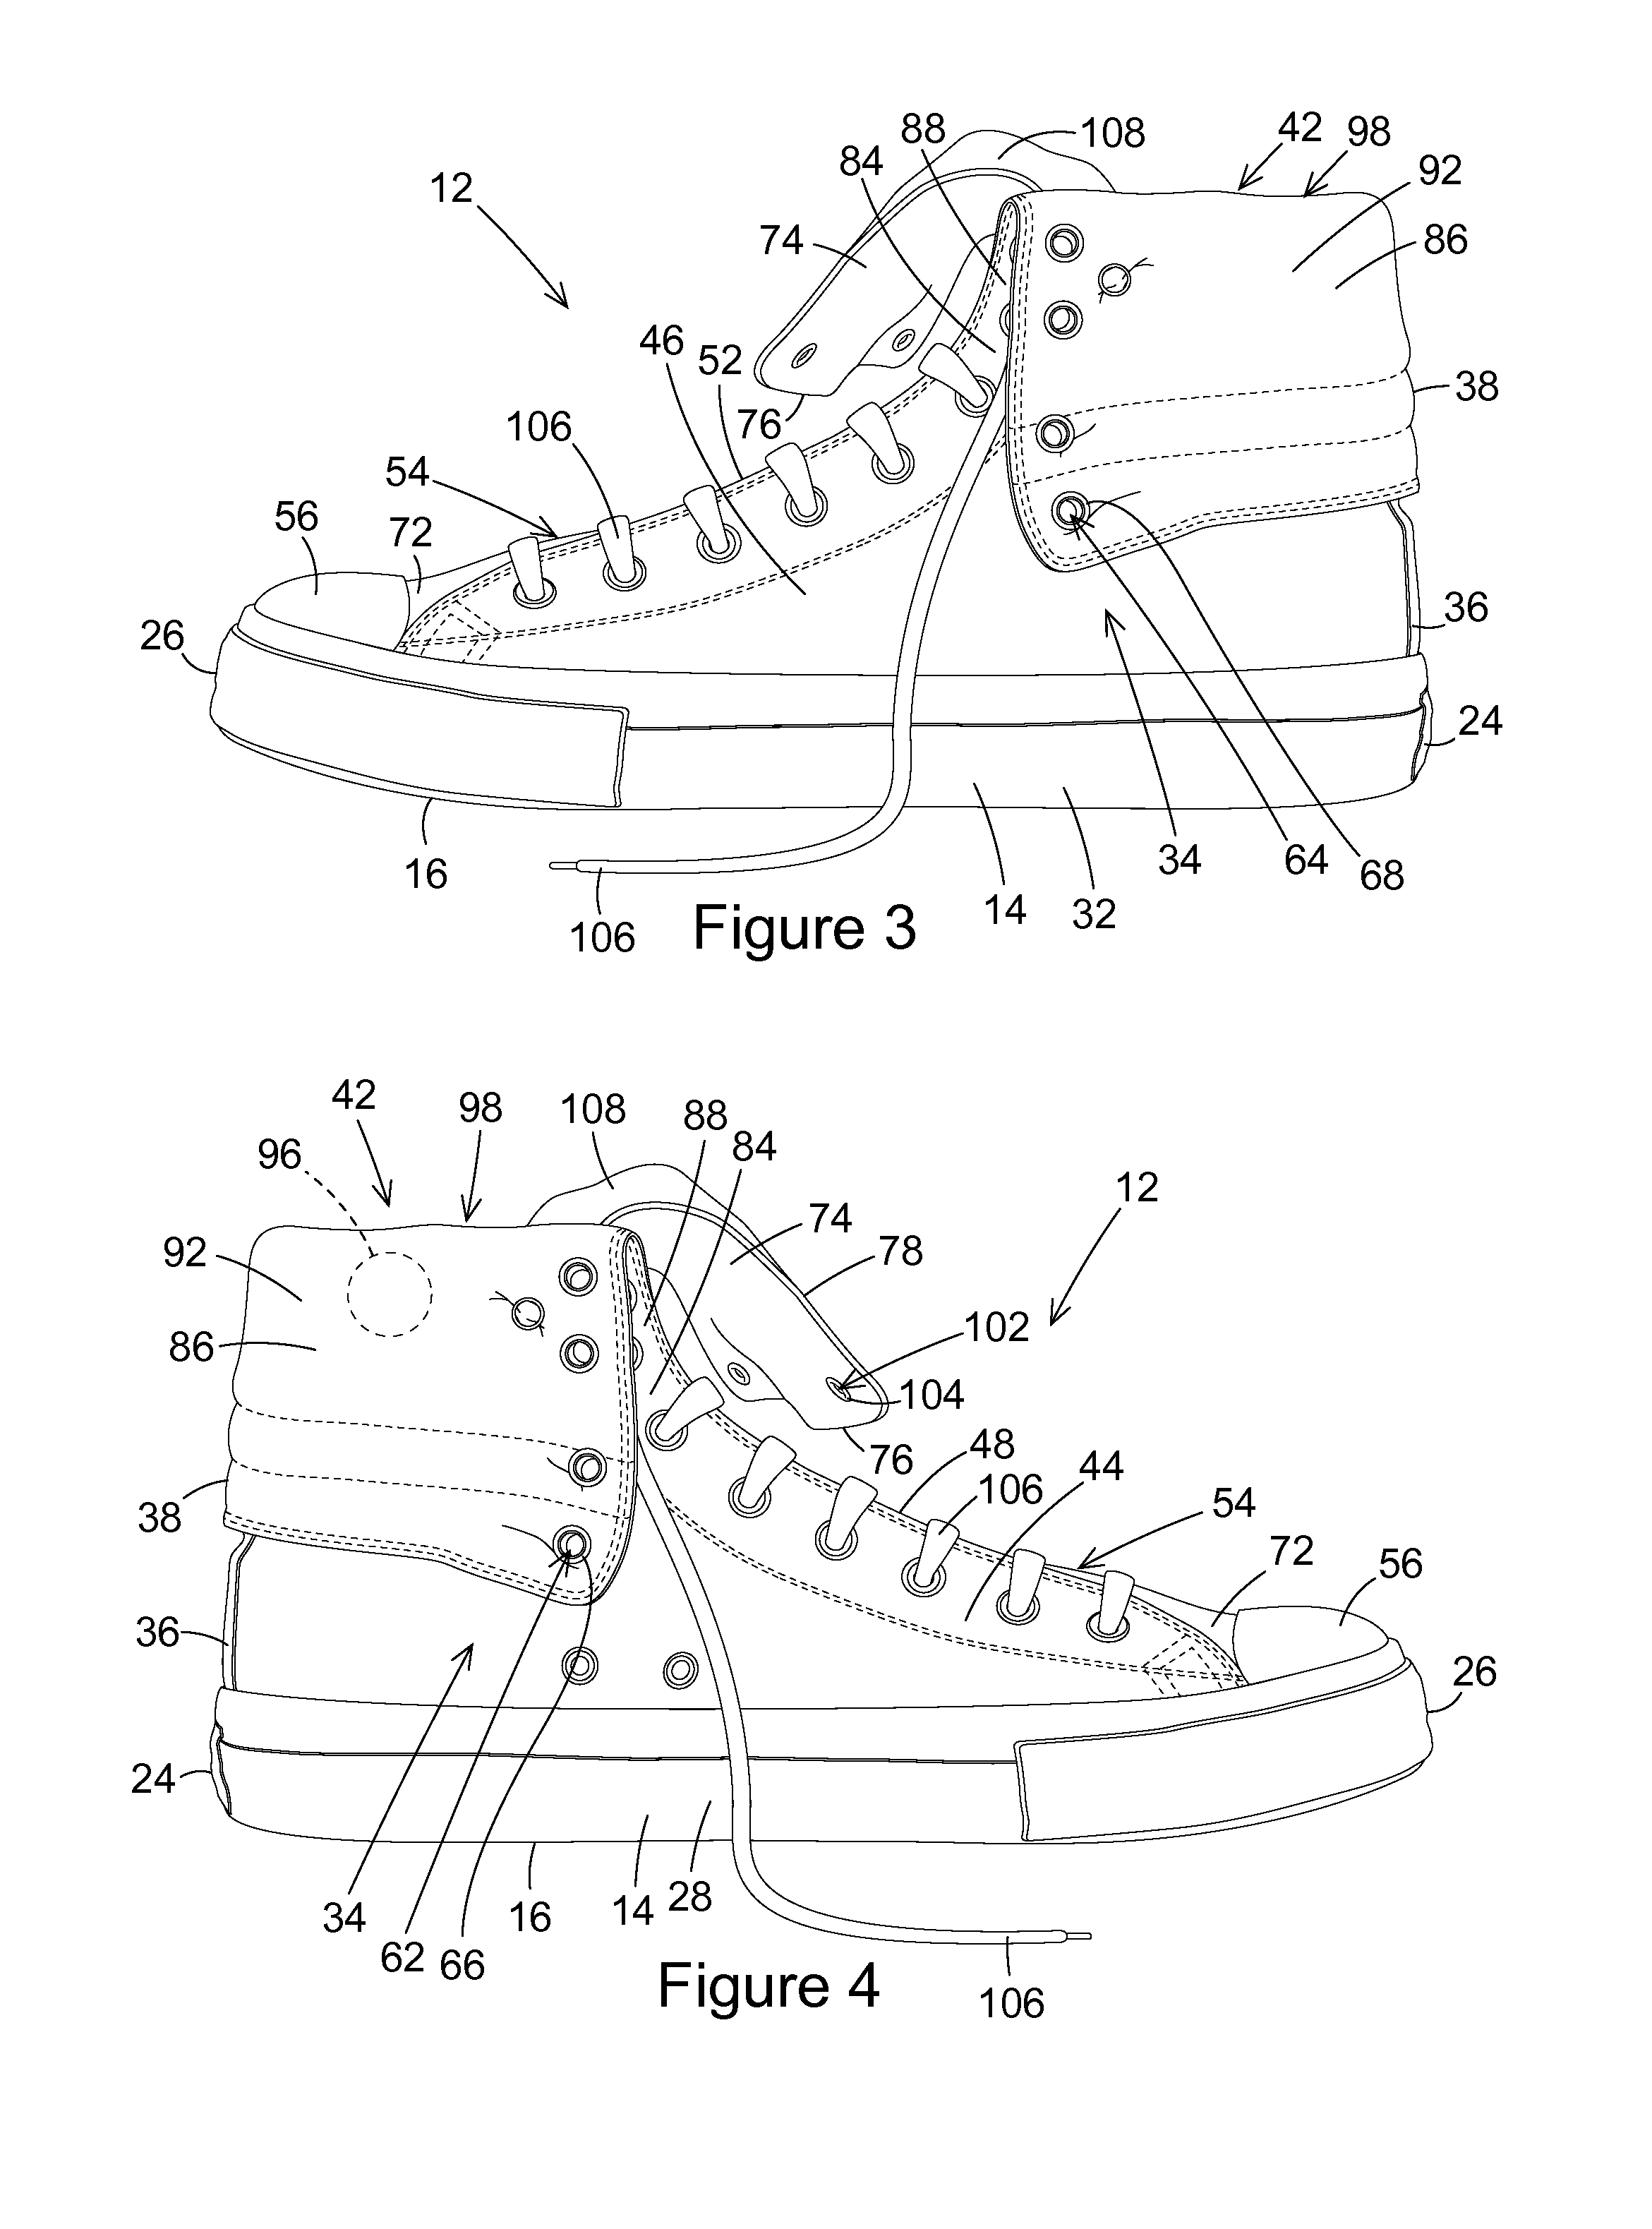 Shoe Construction With Fold Over Ankle